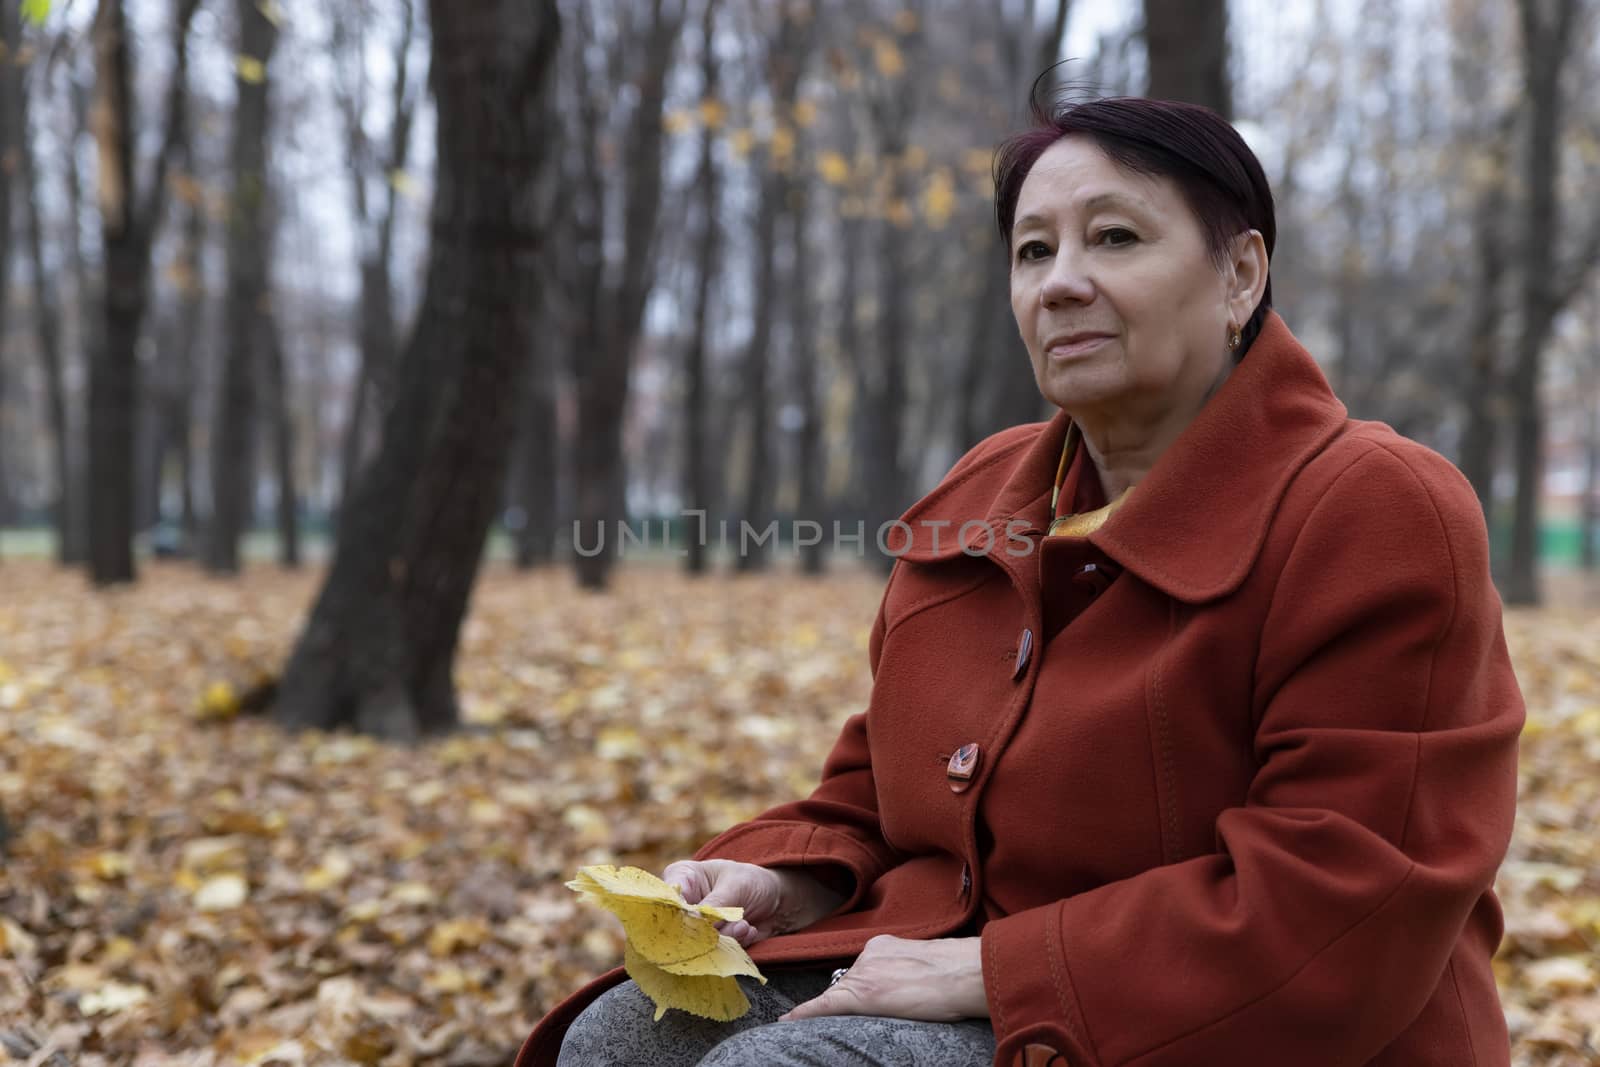 An elderly woman in a bright terracotta coat sits thoughtfully in an autumn Park